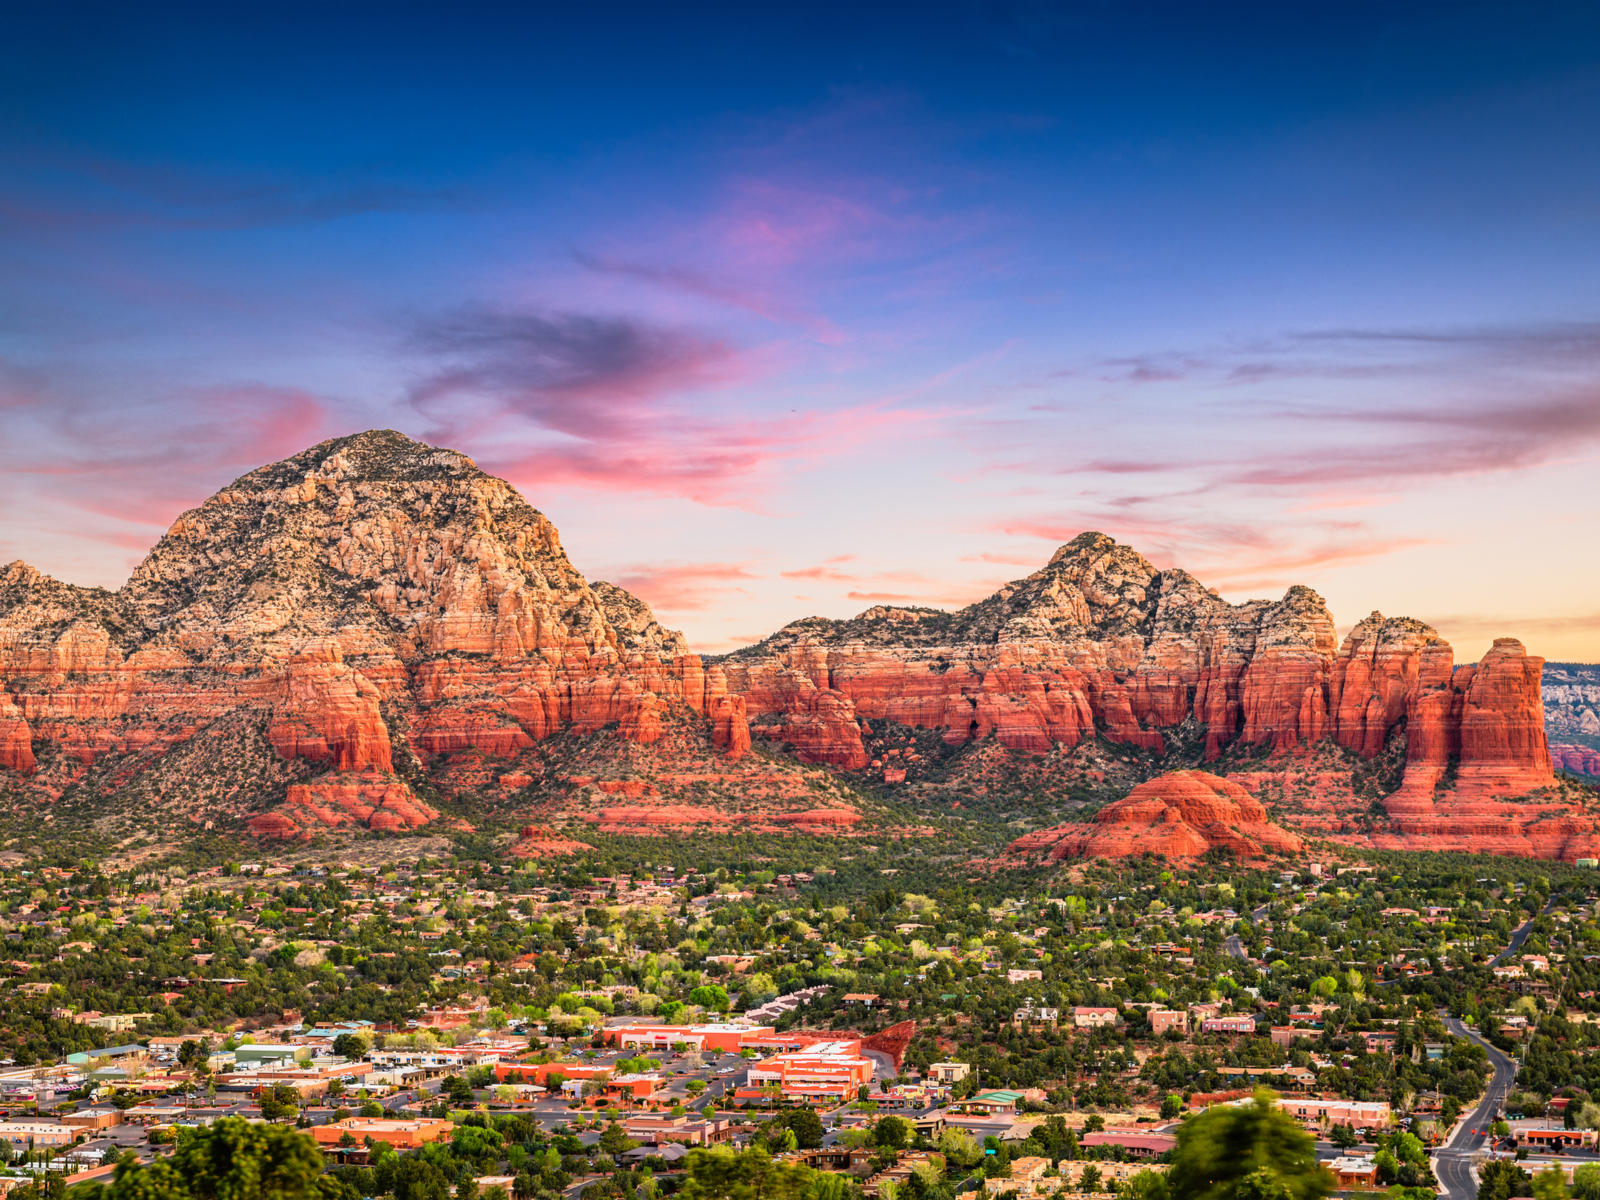 Dusk view of one of the best places to visit in Arizona, Sedona, on a clear day with a pink sky